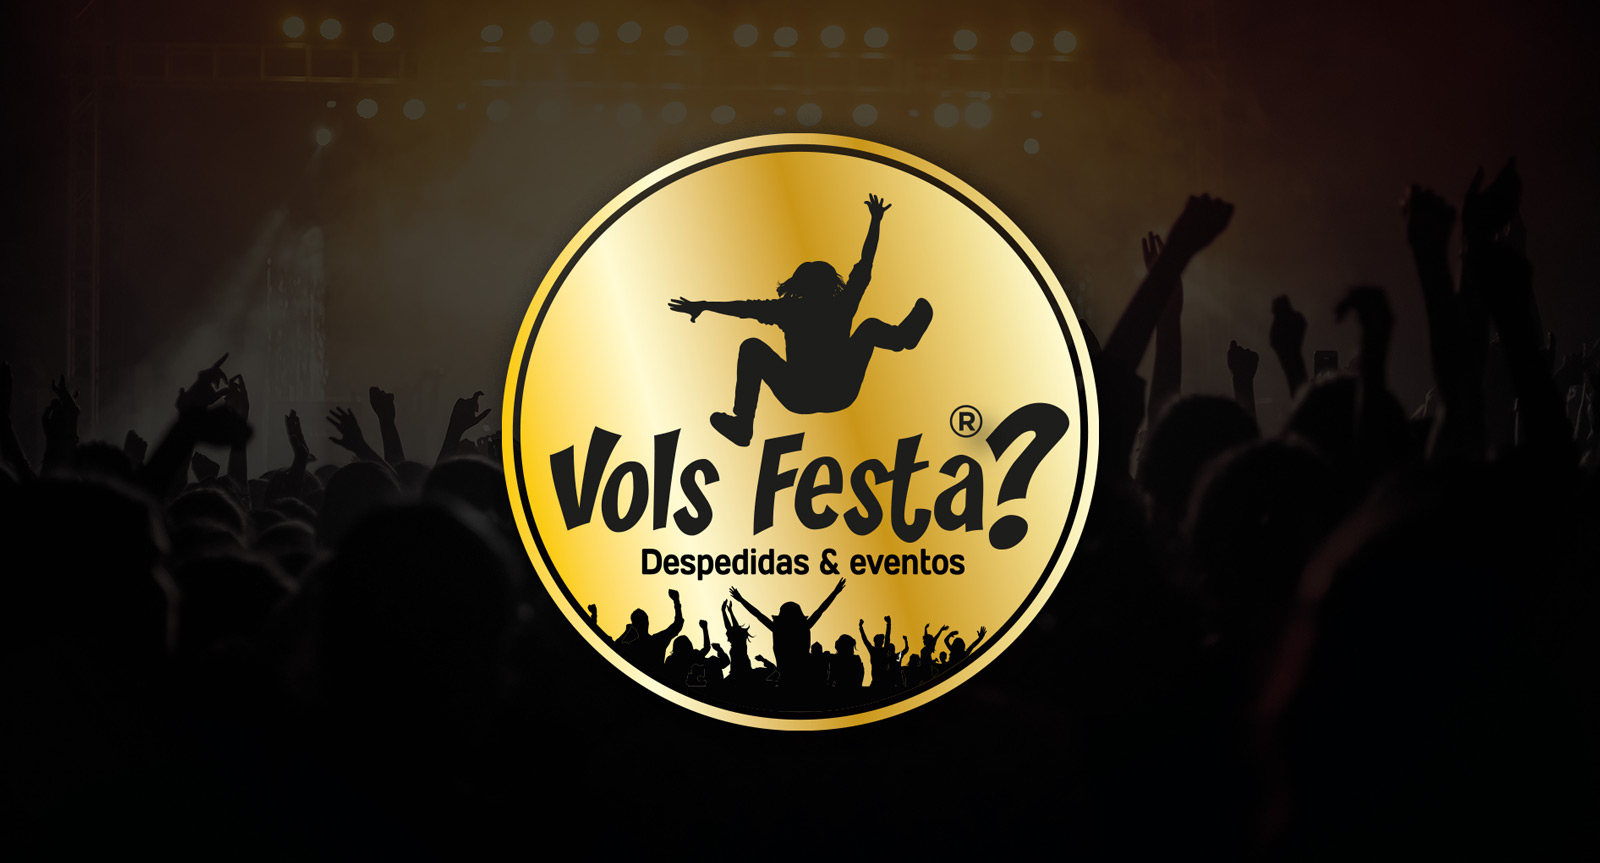 Graphic and creative design of logo and branding for brand of nightclubs, parties and events Volsfesta